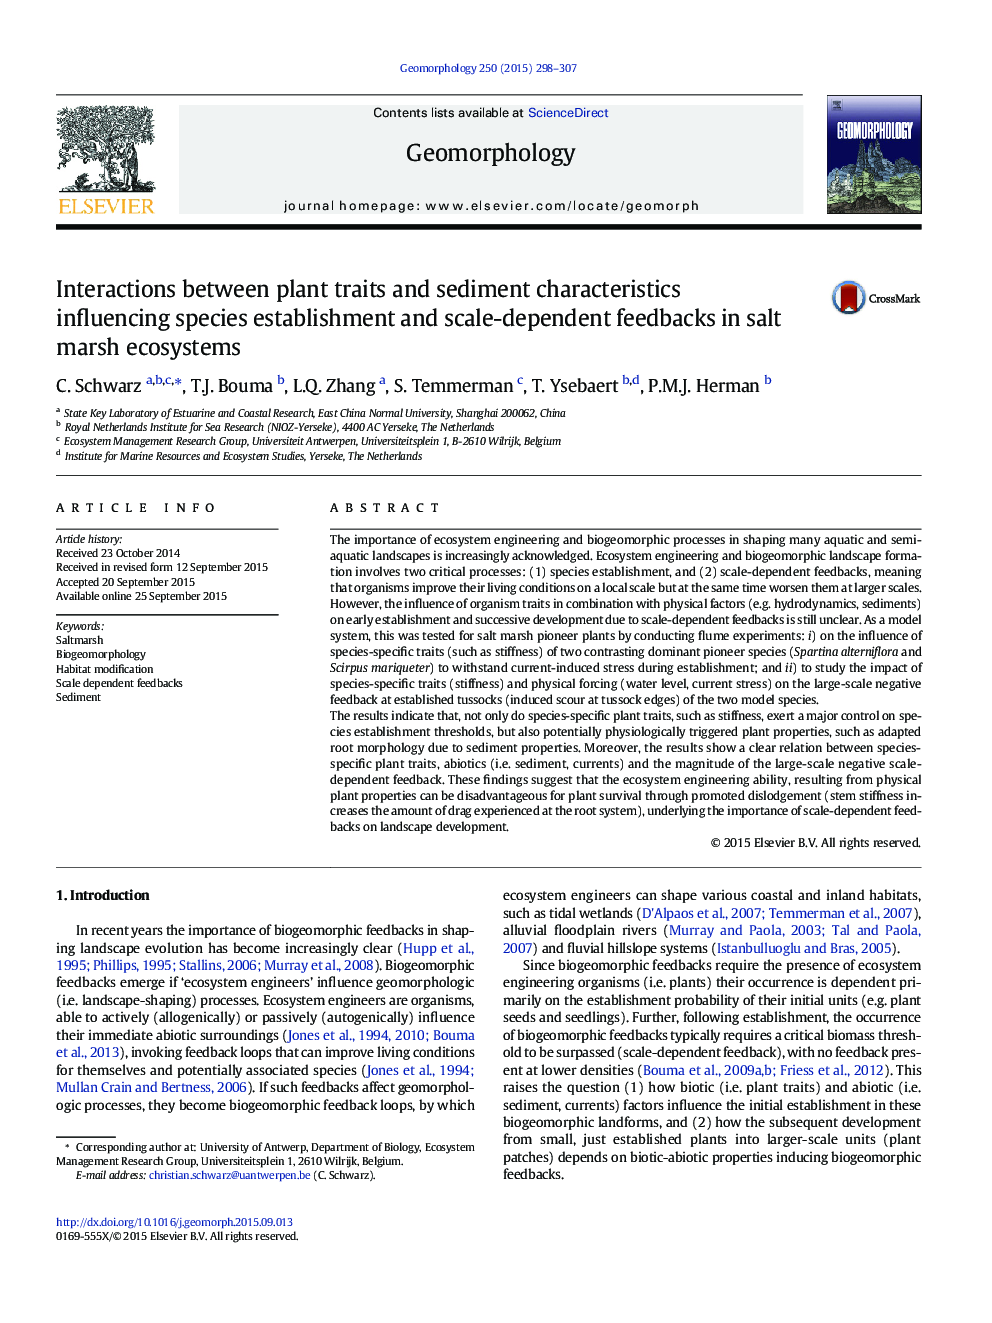 Interactions between plant traits and sediment characteristics influencing species establishment and scale-dependent feedbacks in salt marsh ecosystems